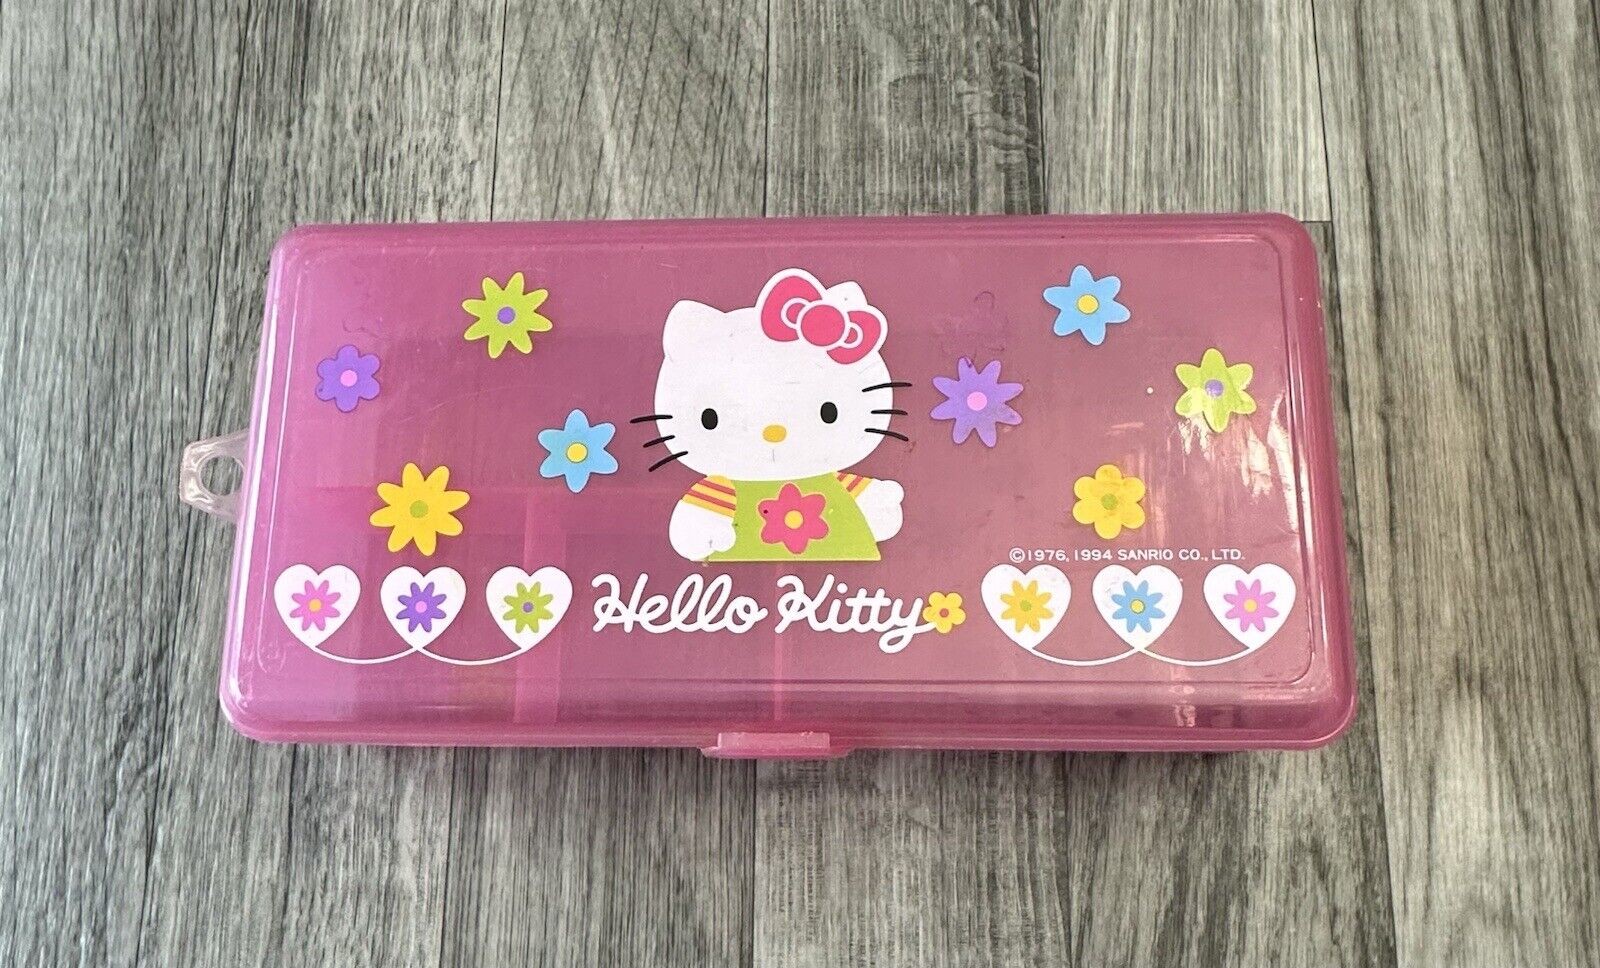 Vtg 1994 Sanrio Hello Kitty Snack Trinket Storage Box Container Made In Taiwan